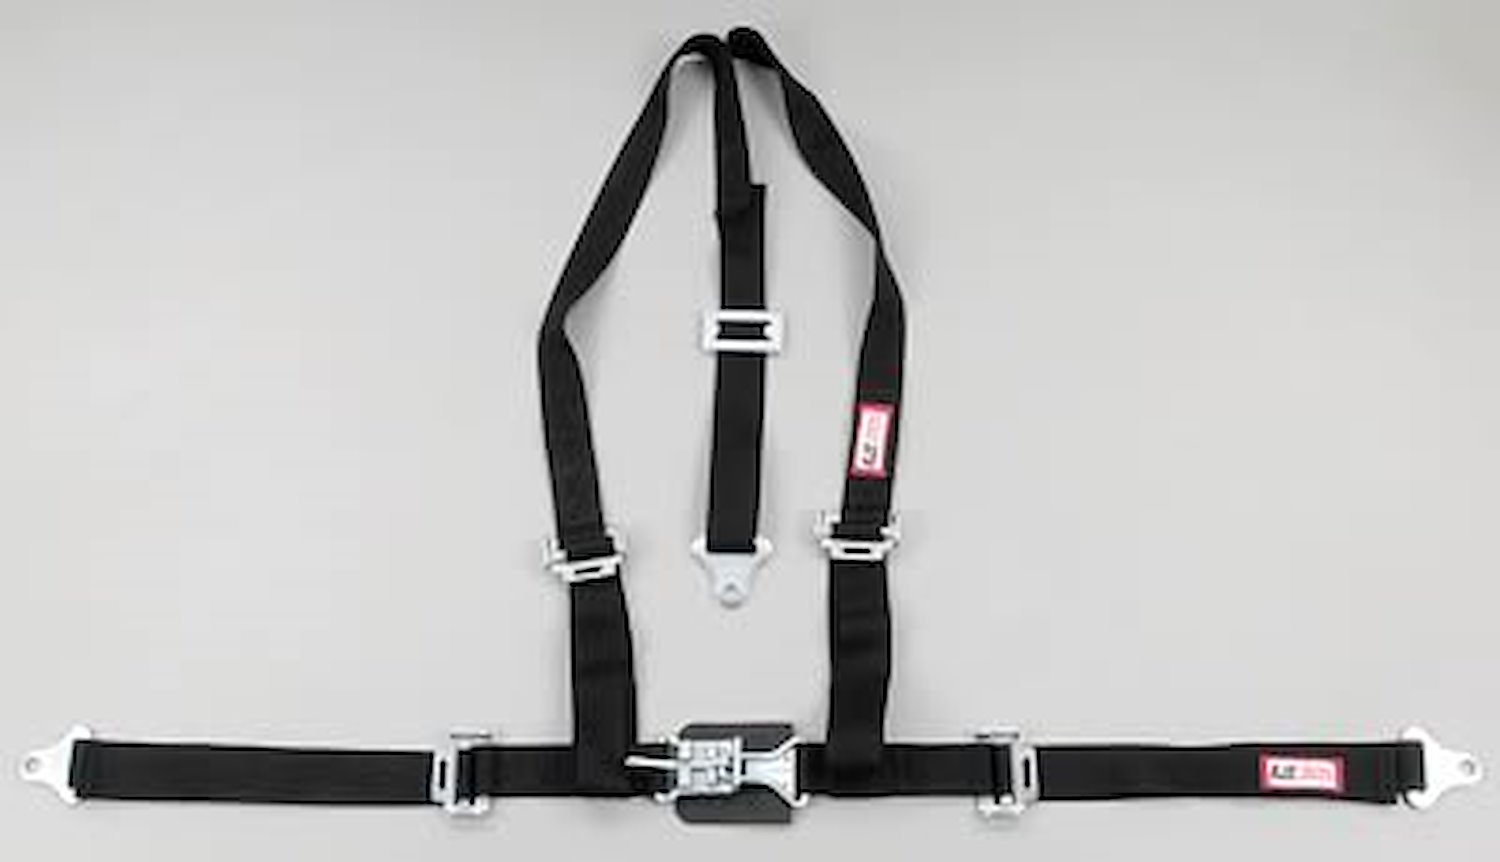 NON-SFI L&L HARNESS 2 PULL UP Lap Belt SNAP SEWN IN 2 S.H. Individual ROLL BAR Mount WRAP/BOLT RED